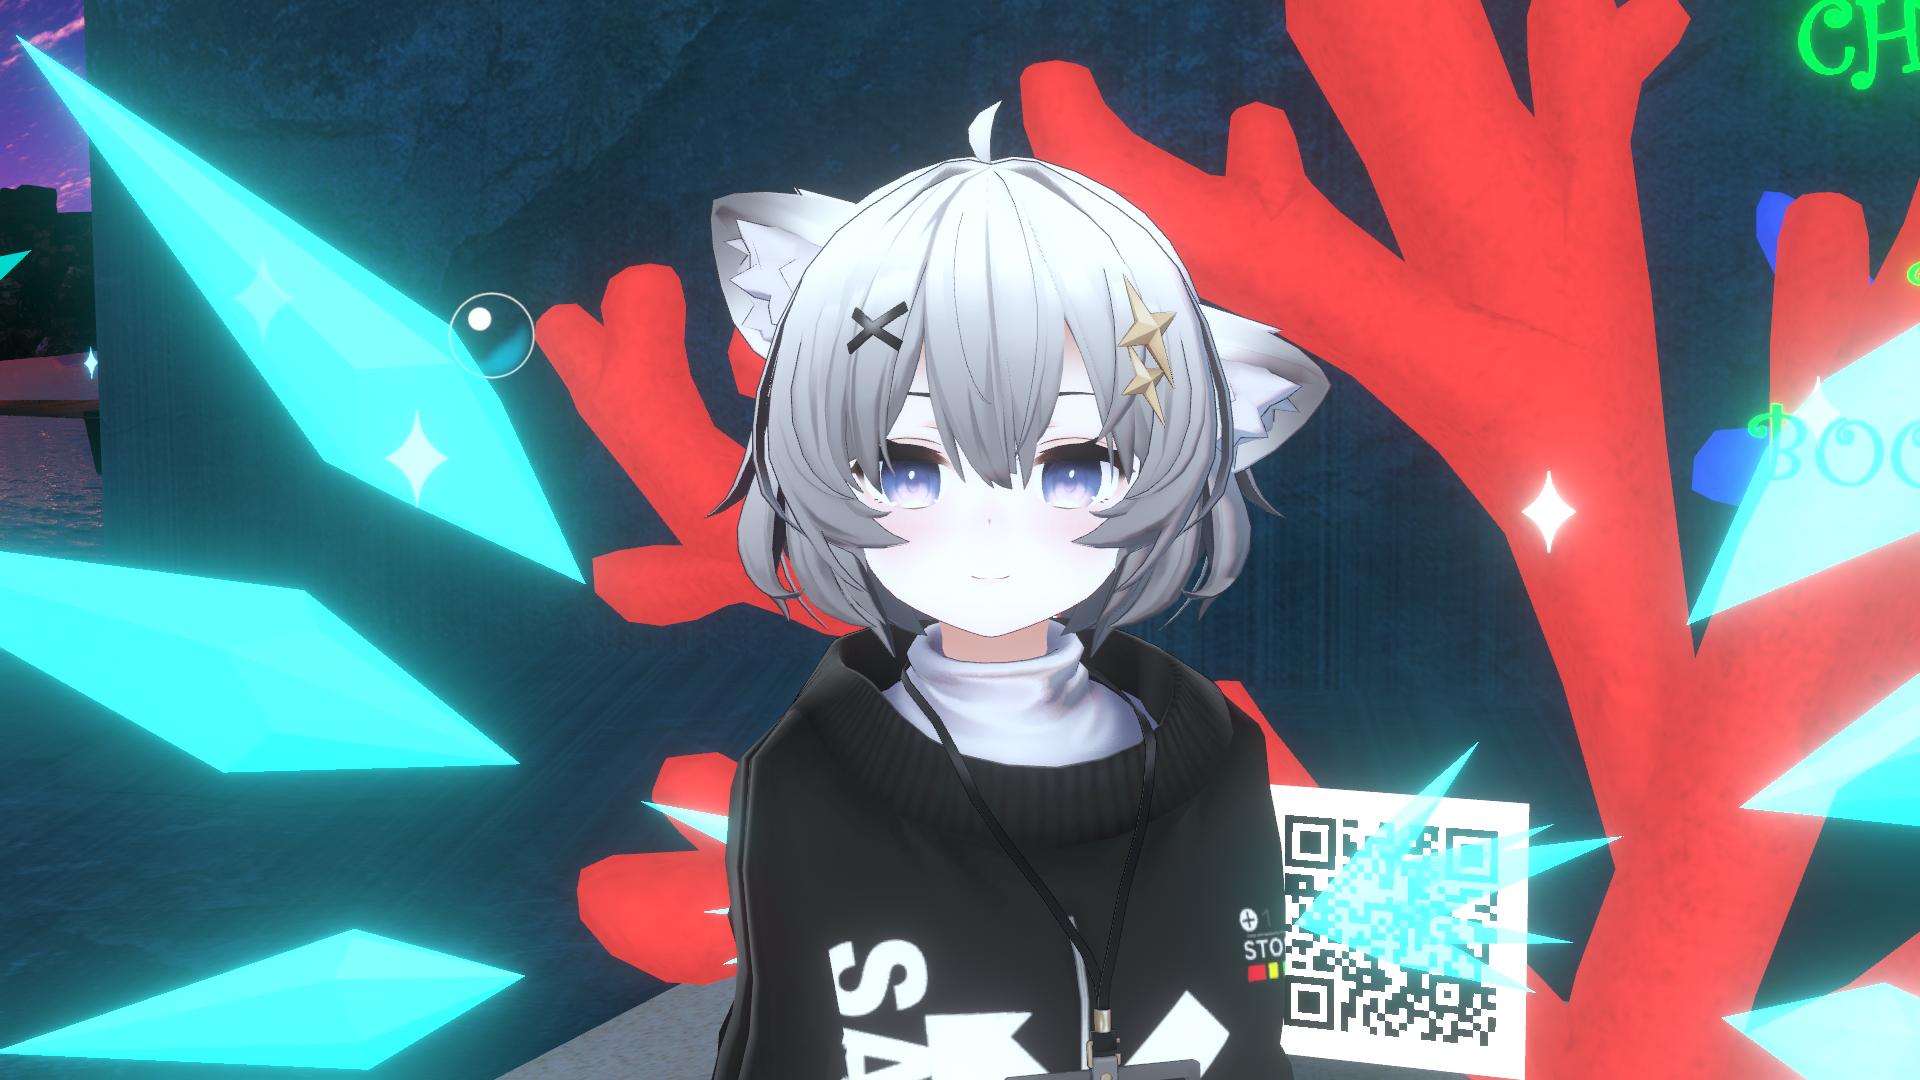 VRChat_1920x1080_2021-12-05_04-01-53.161.png